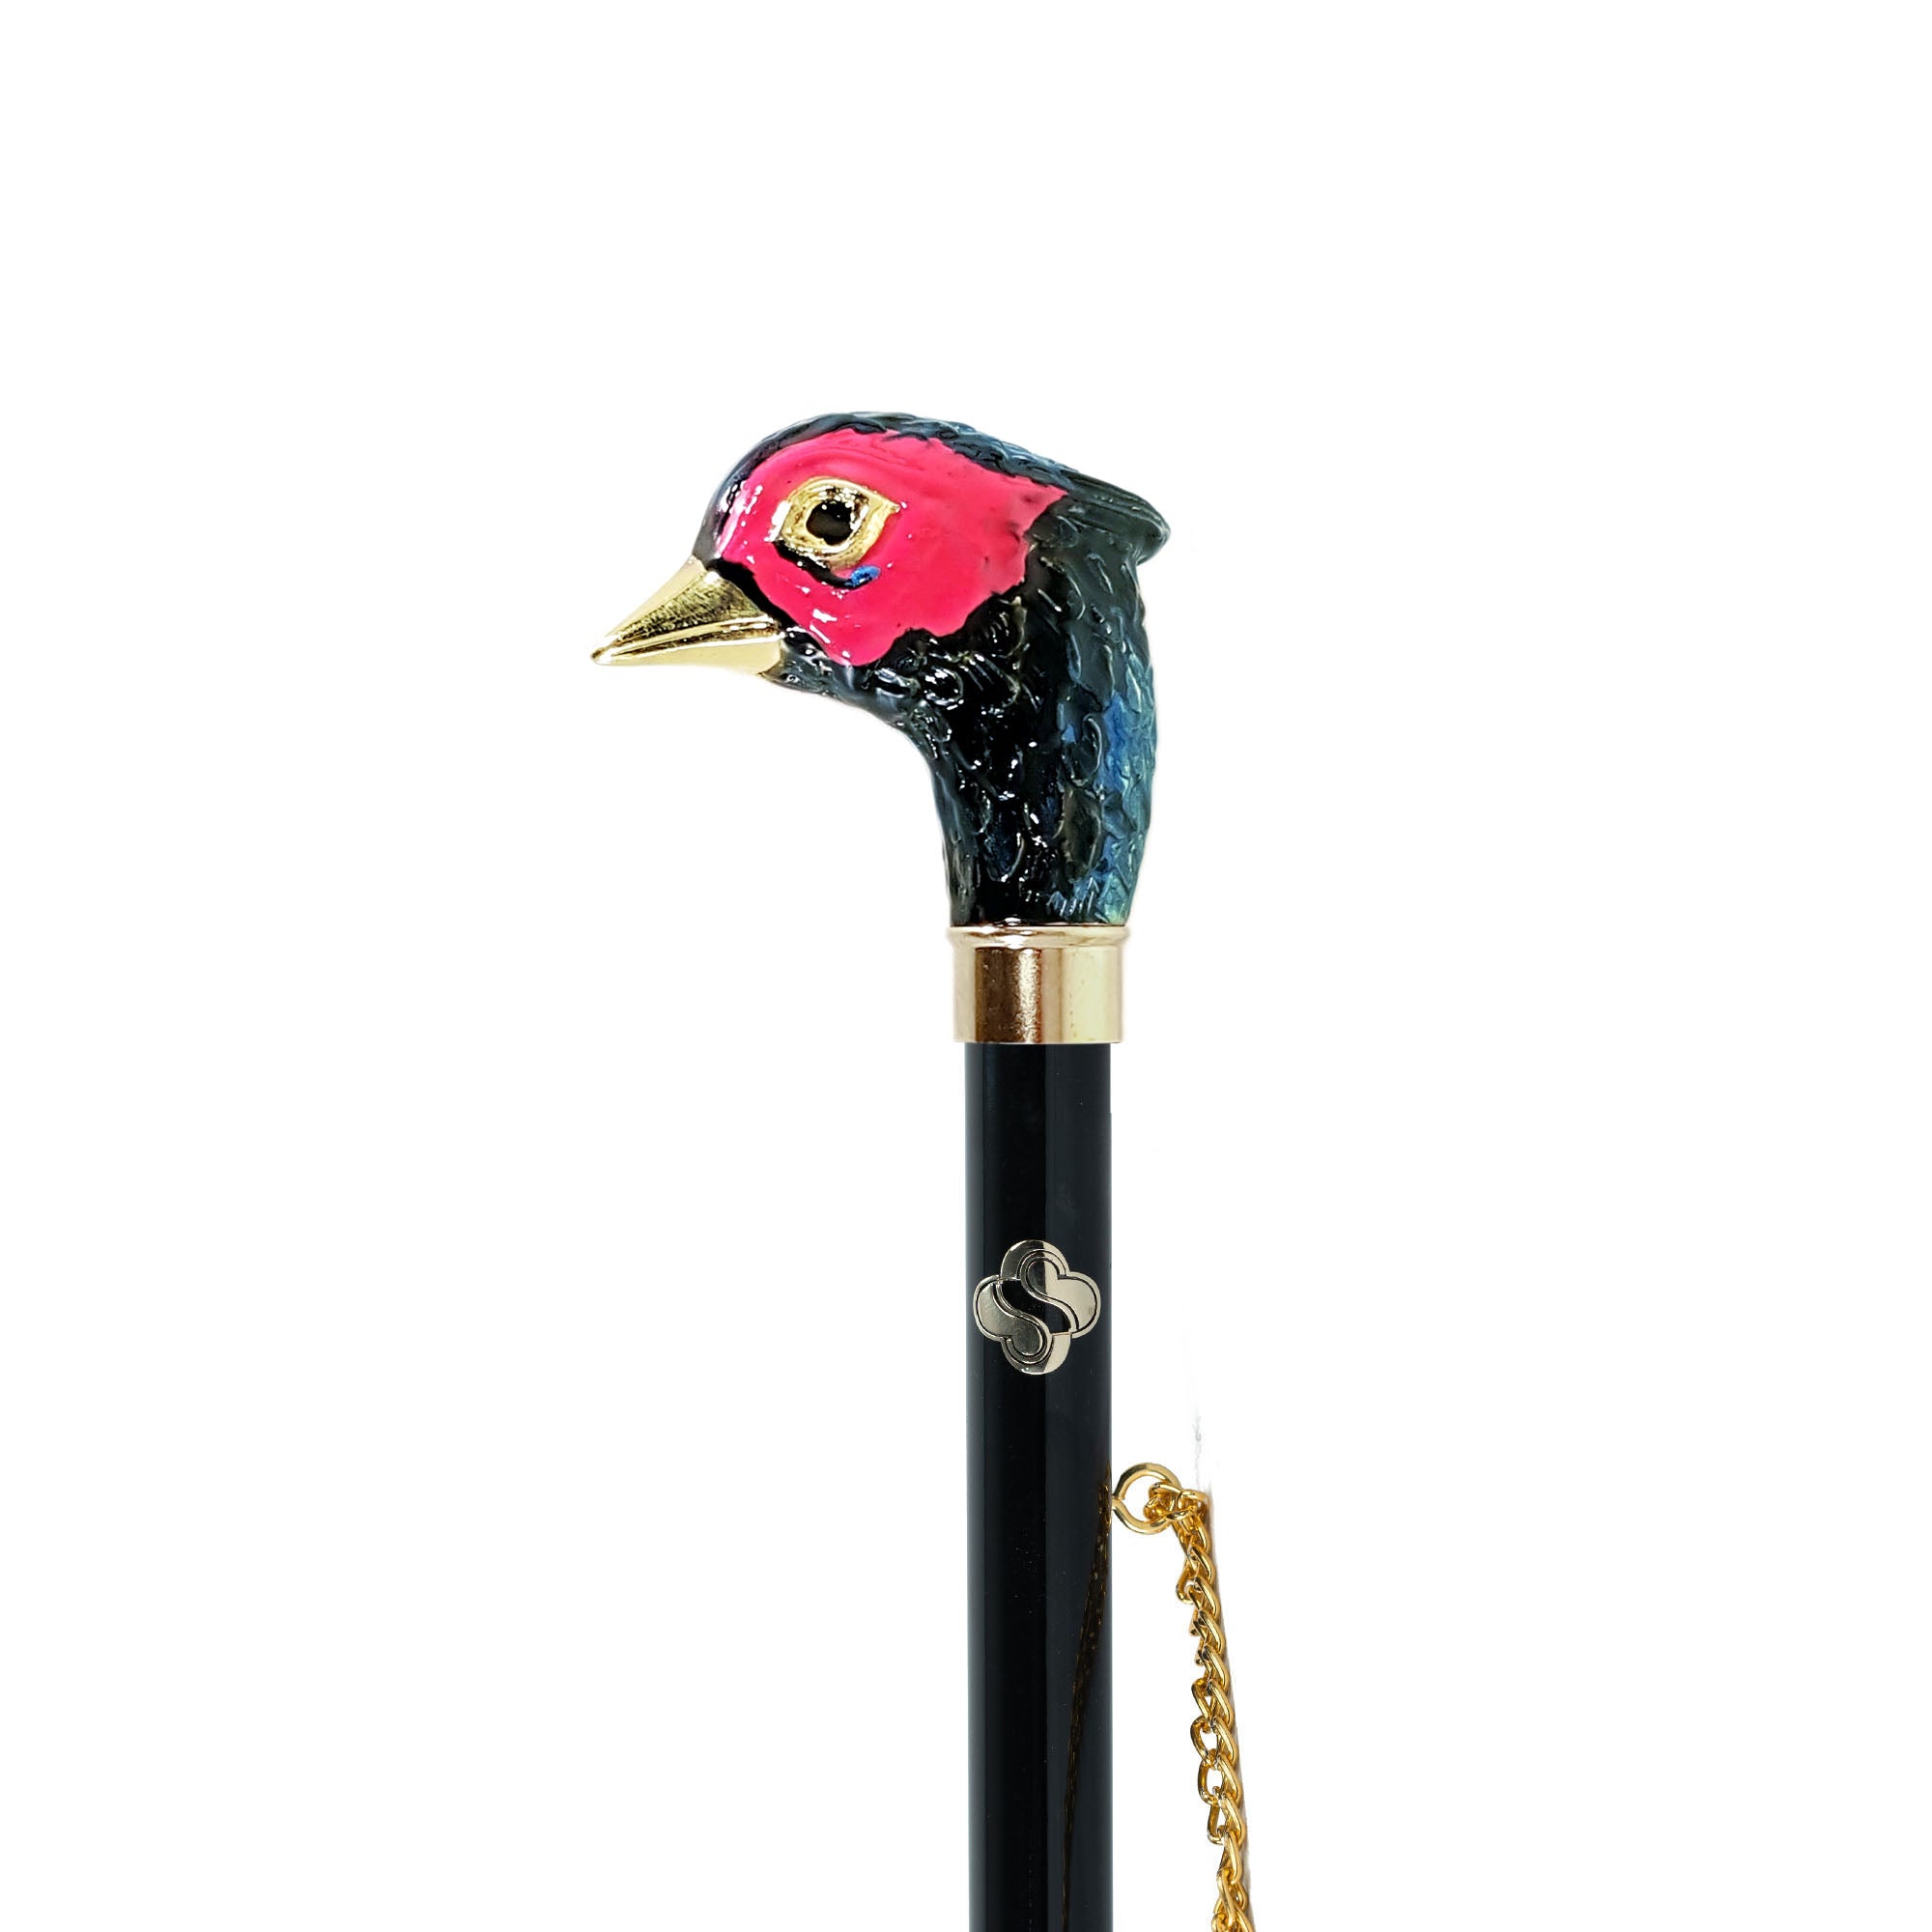 Pheasant Elegance: Hand-Painted 24K Gold-Plated Pheasant Shoehorn